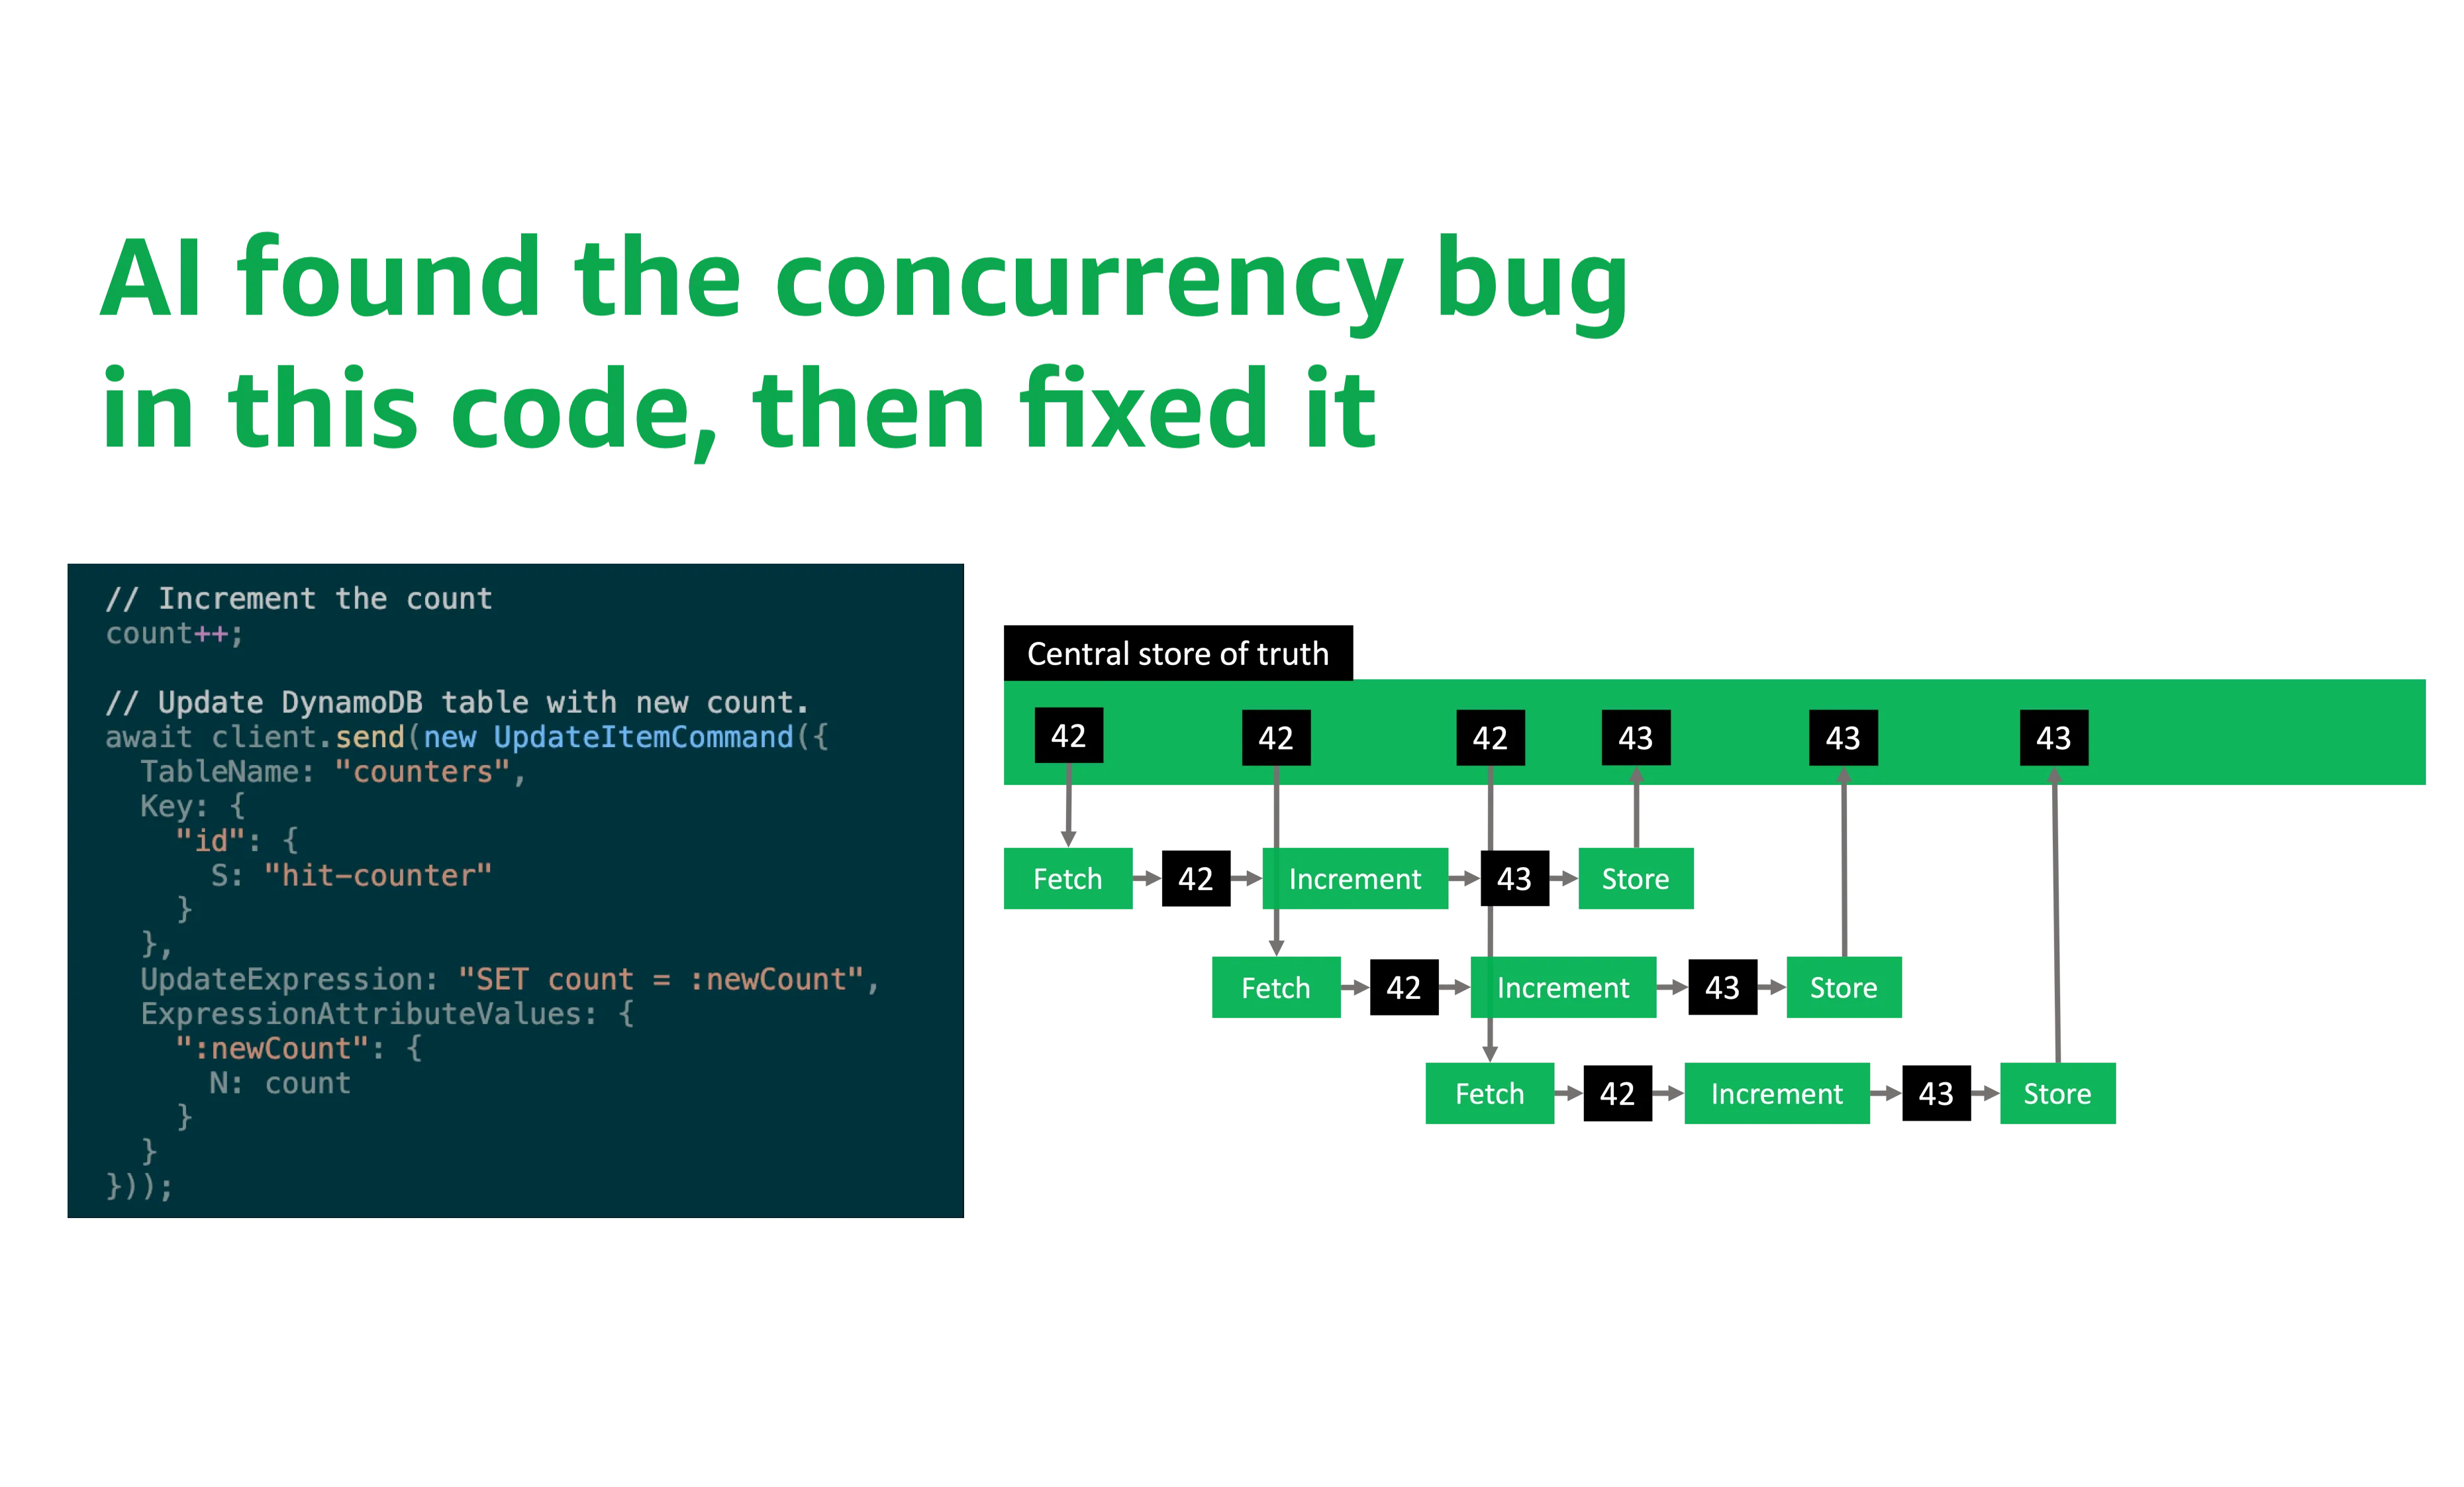 AI found the concurrency bug in this code, then fixed it